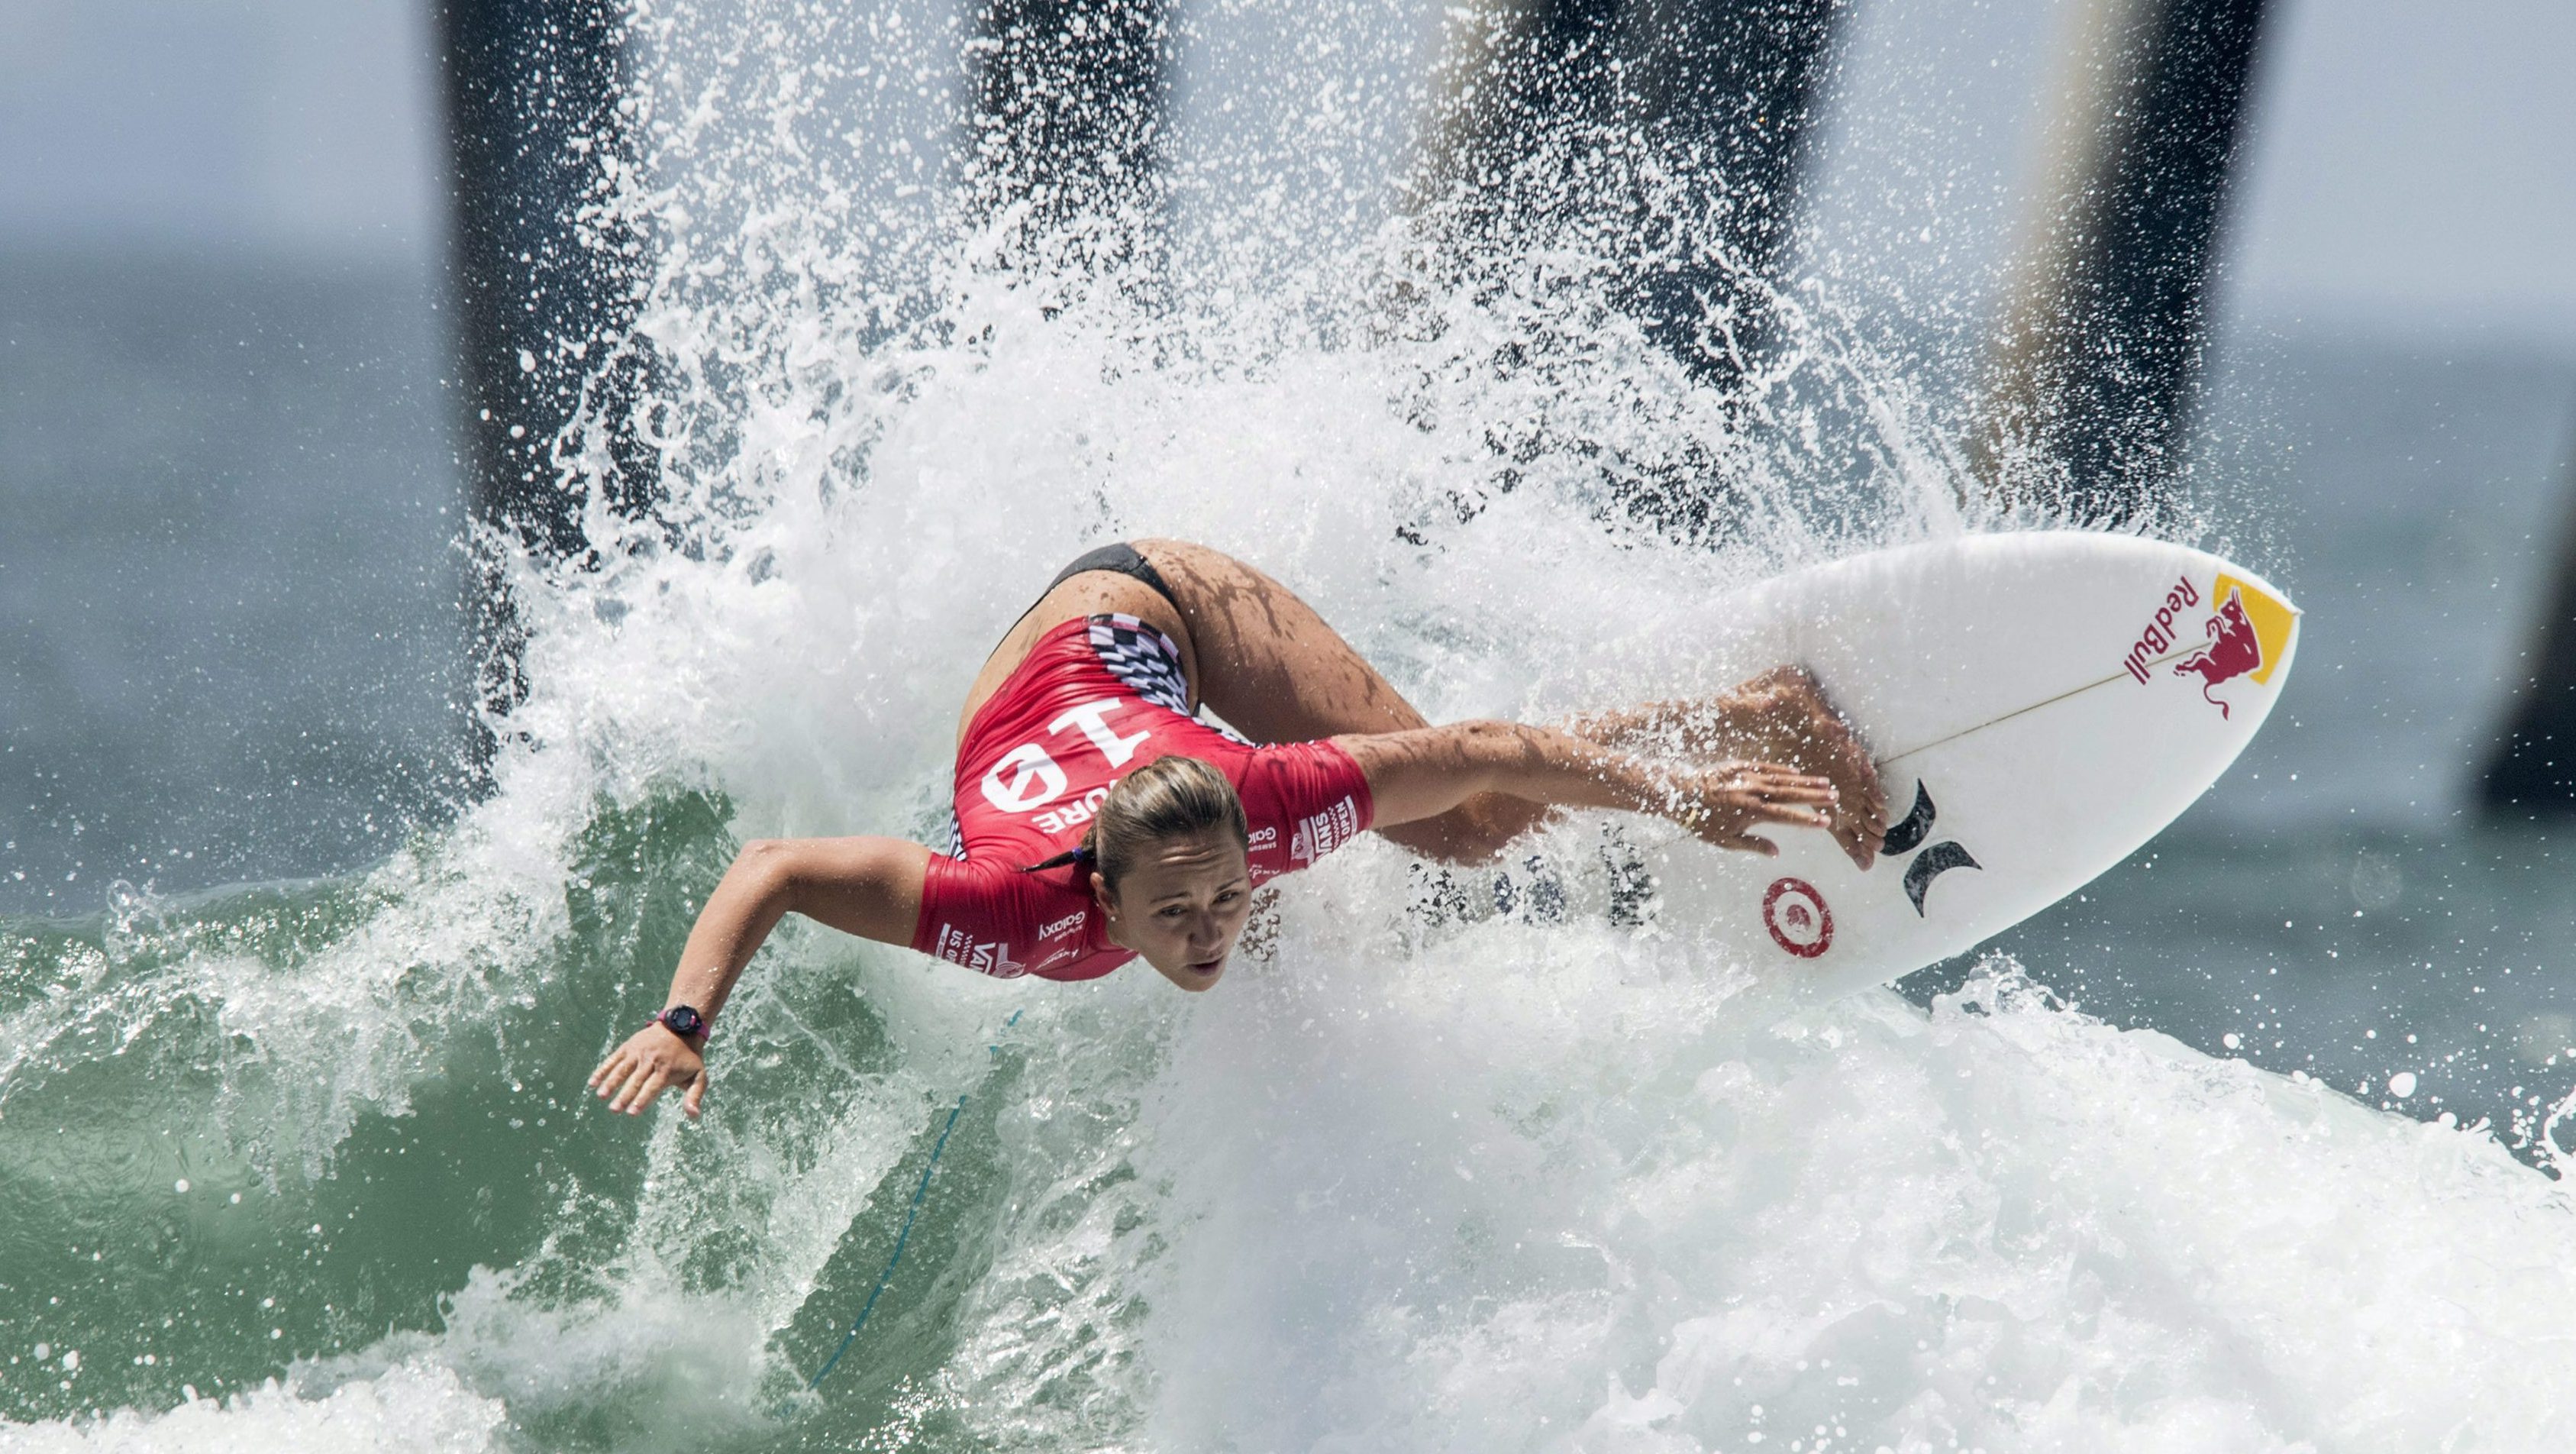 Carissa Moore surfing during a competition